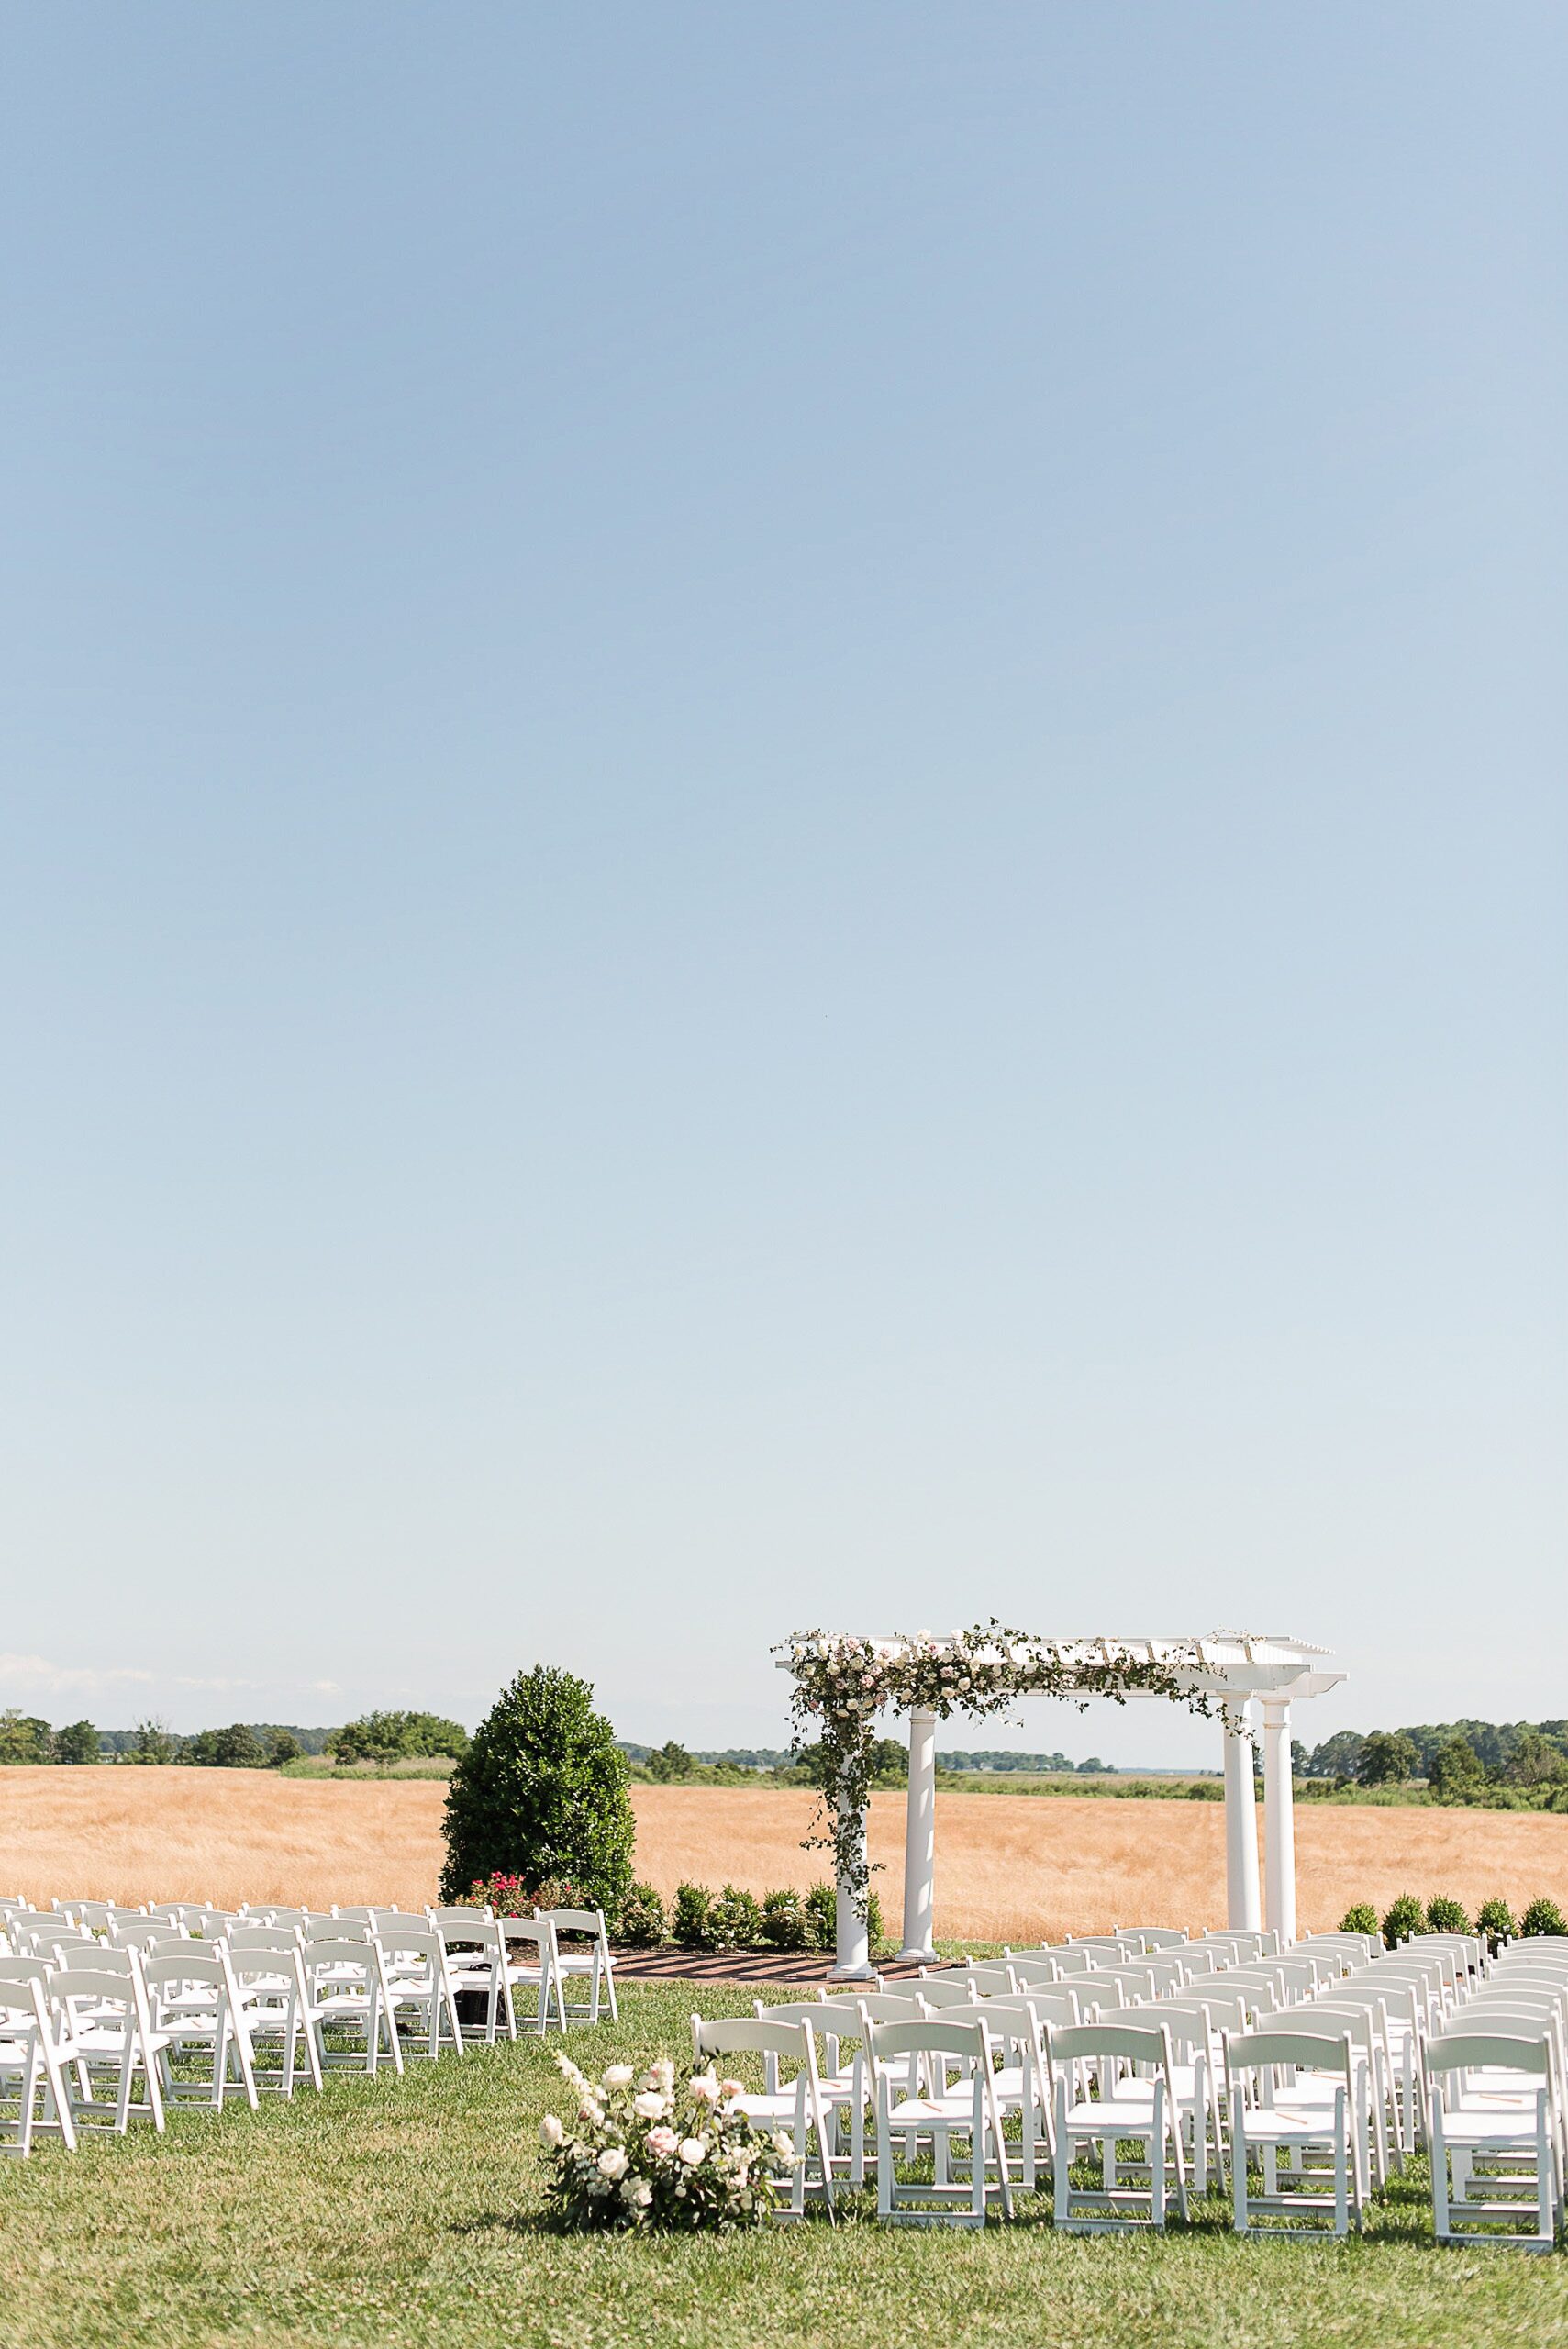 A view of a Kent Island Resort Wedding ceremony set up with white column pergola and white chairs in an open field